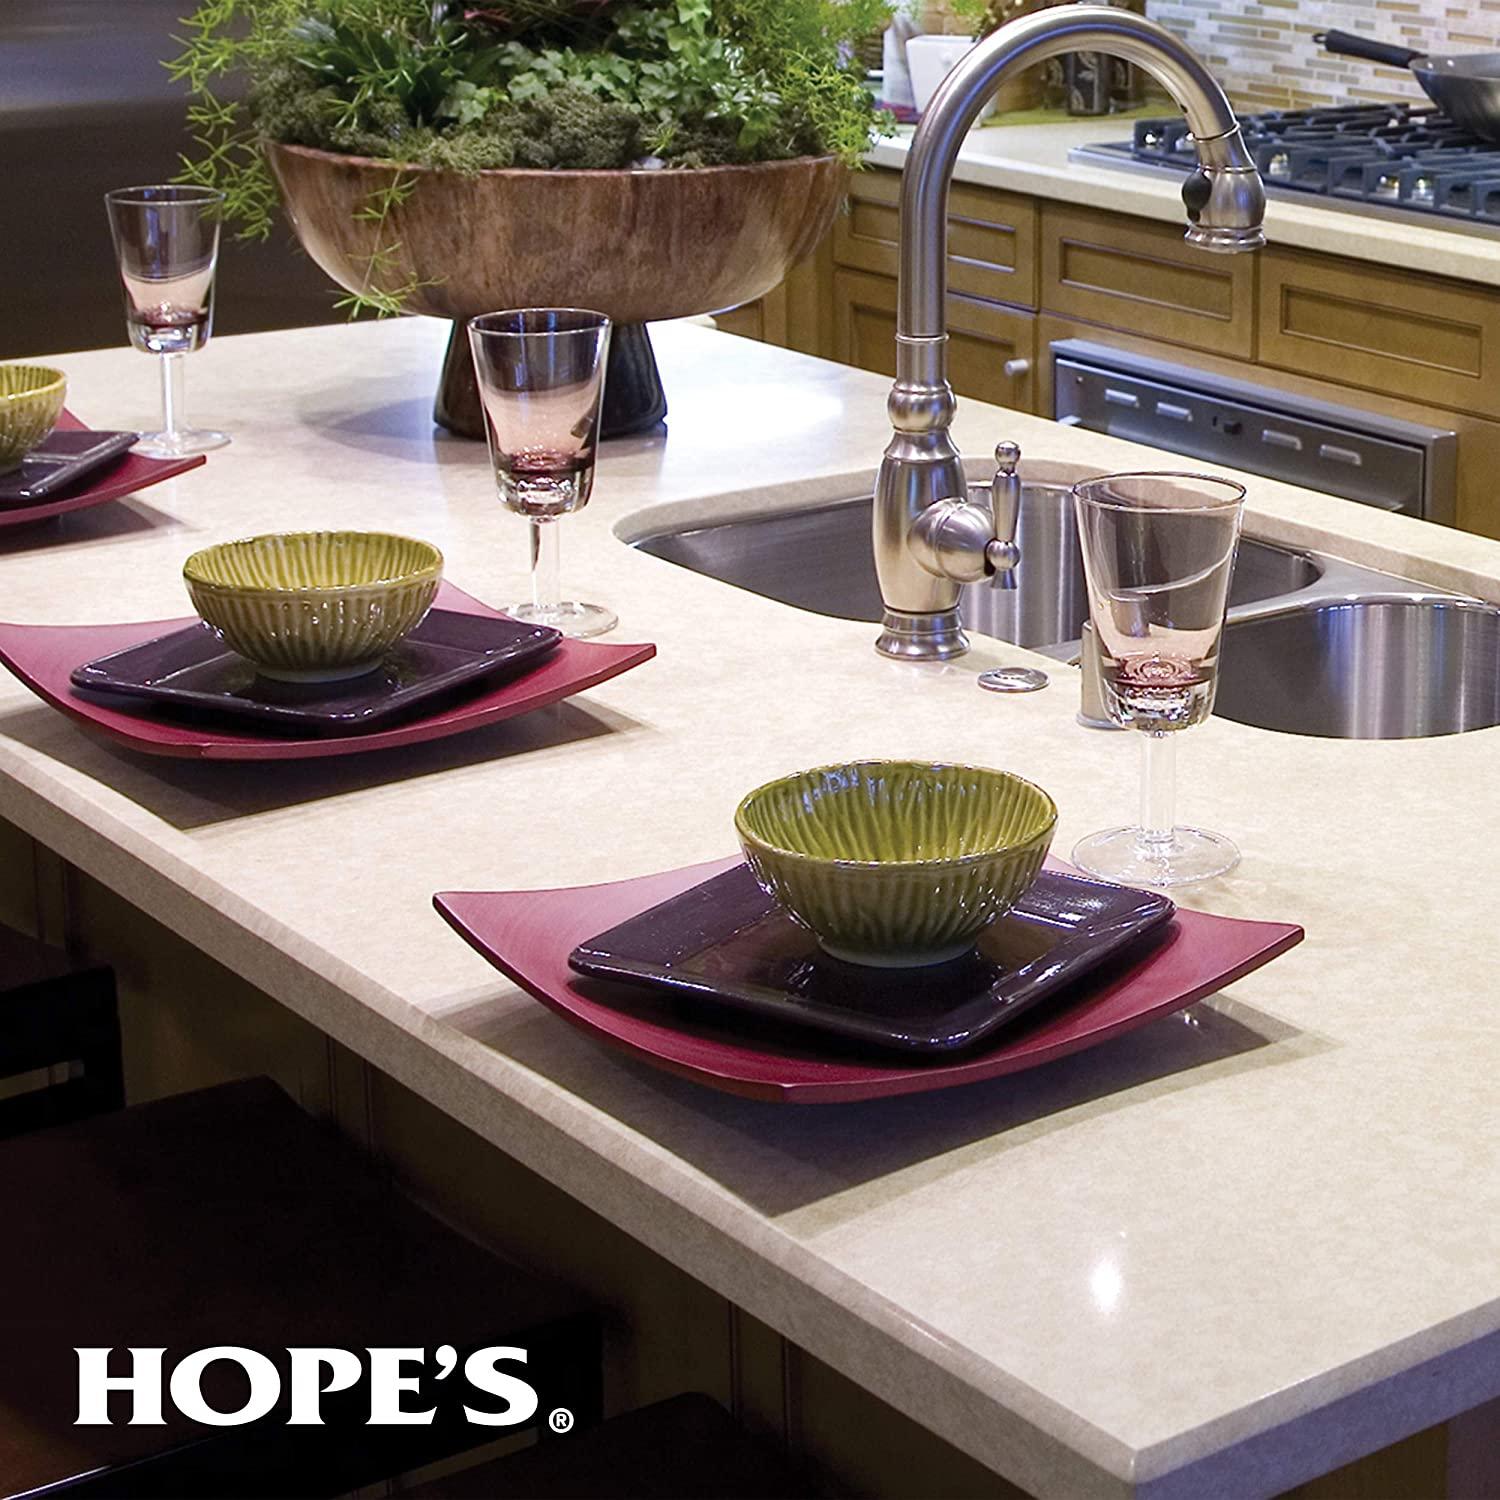 Cleaning Quartz Countertops: Tips For A Sparkling Surface - Lakeside  Surfaces